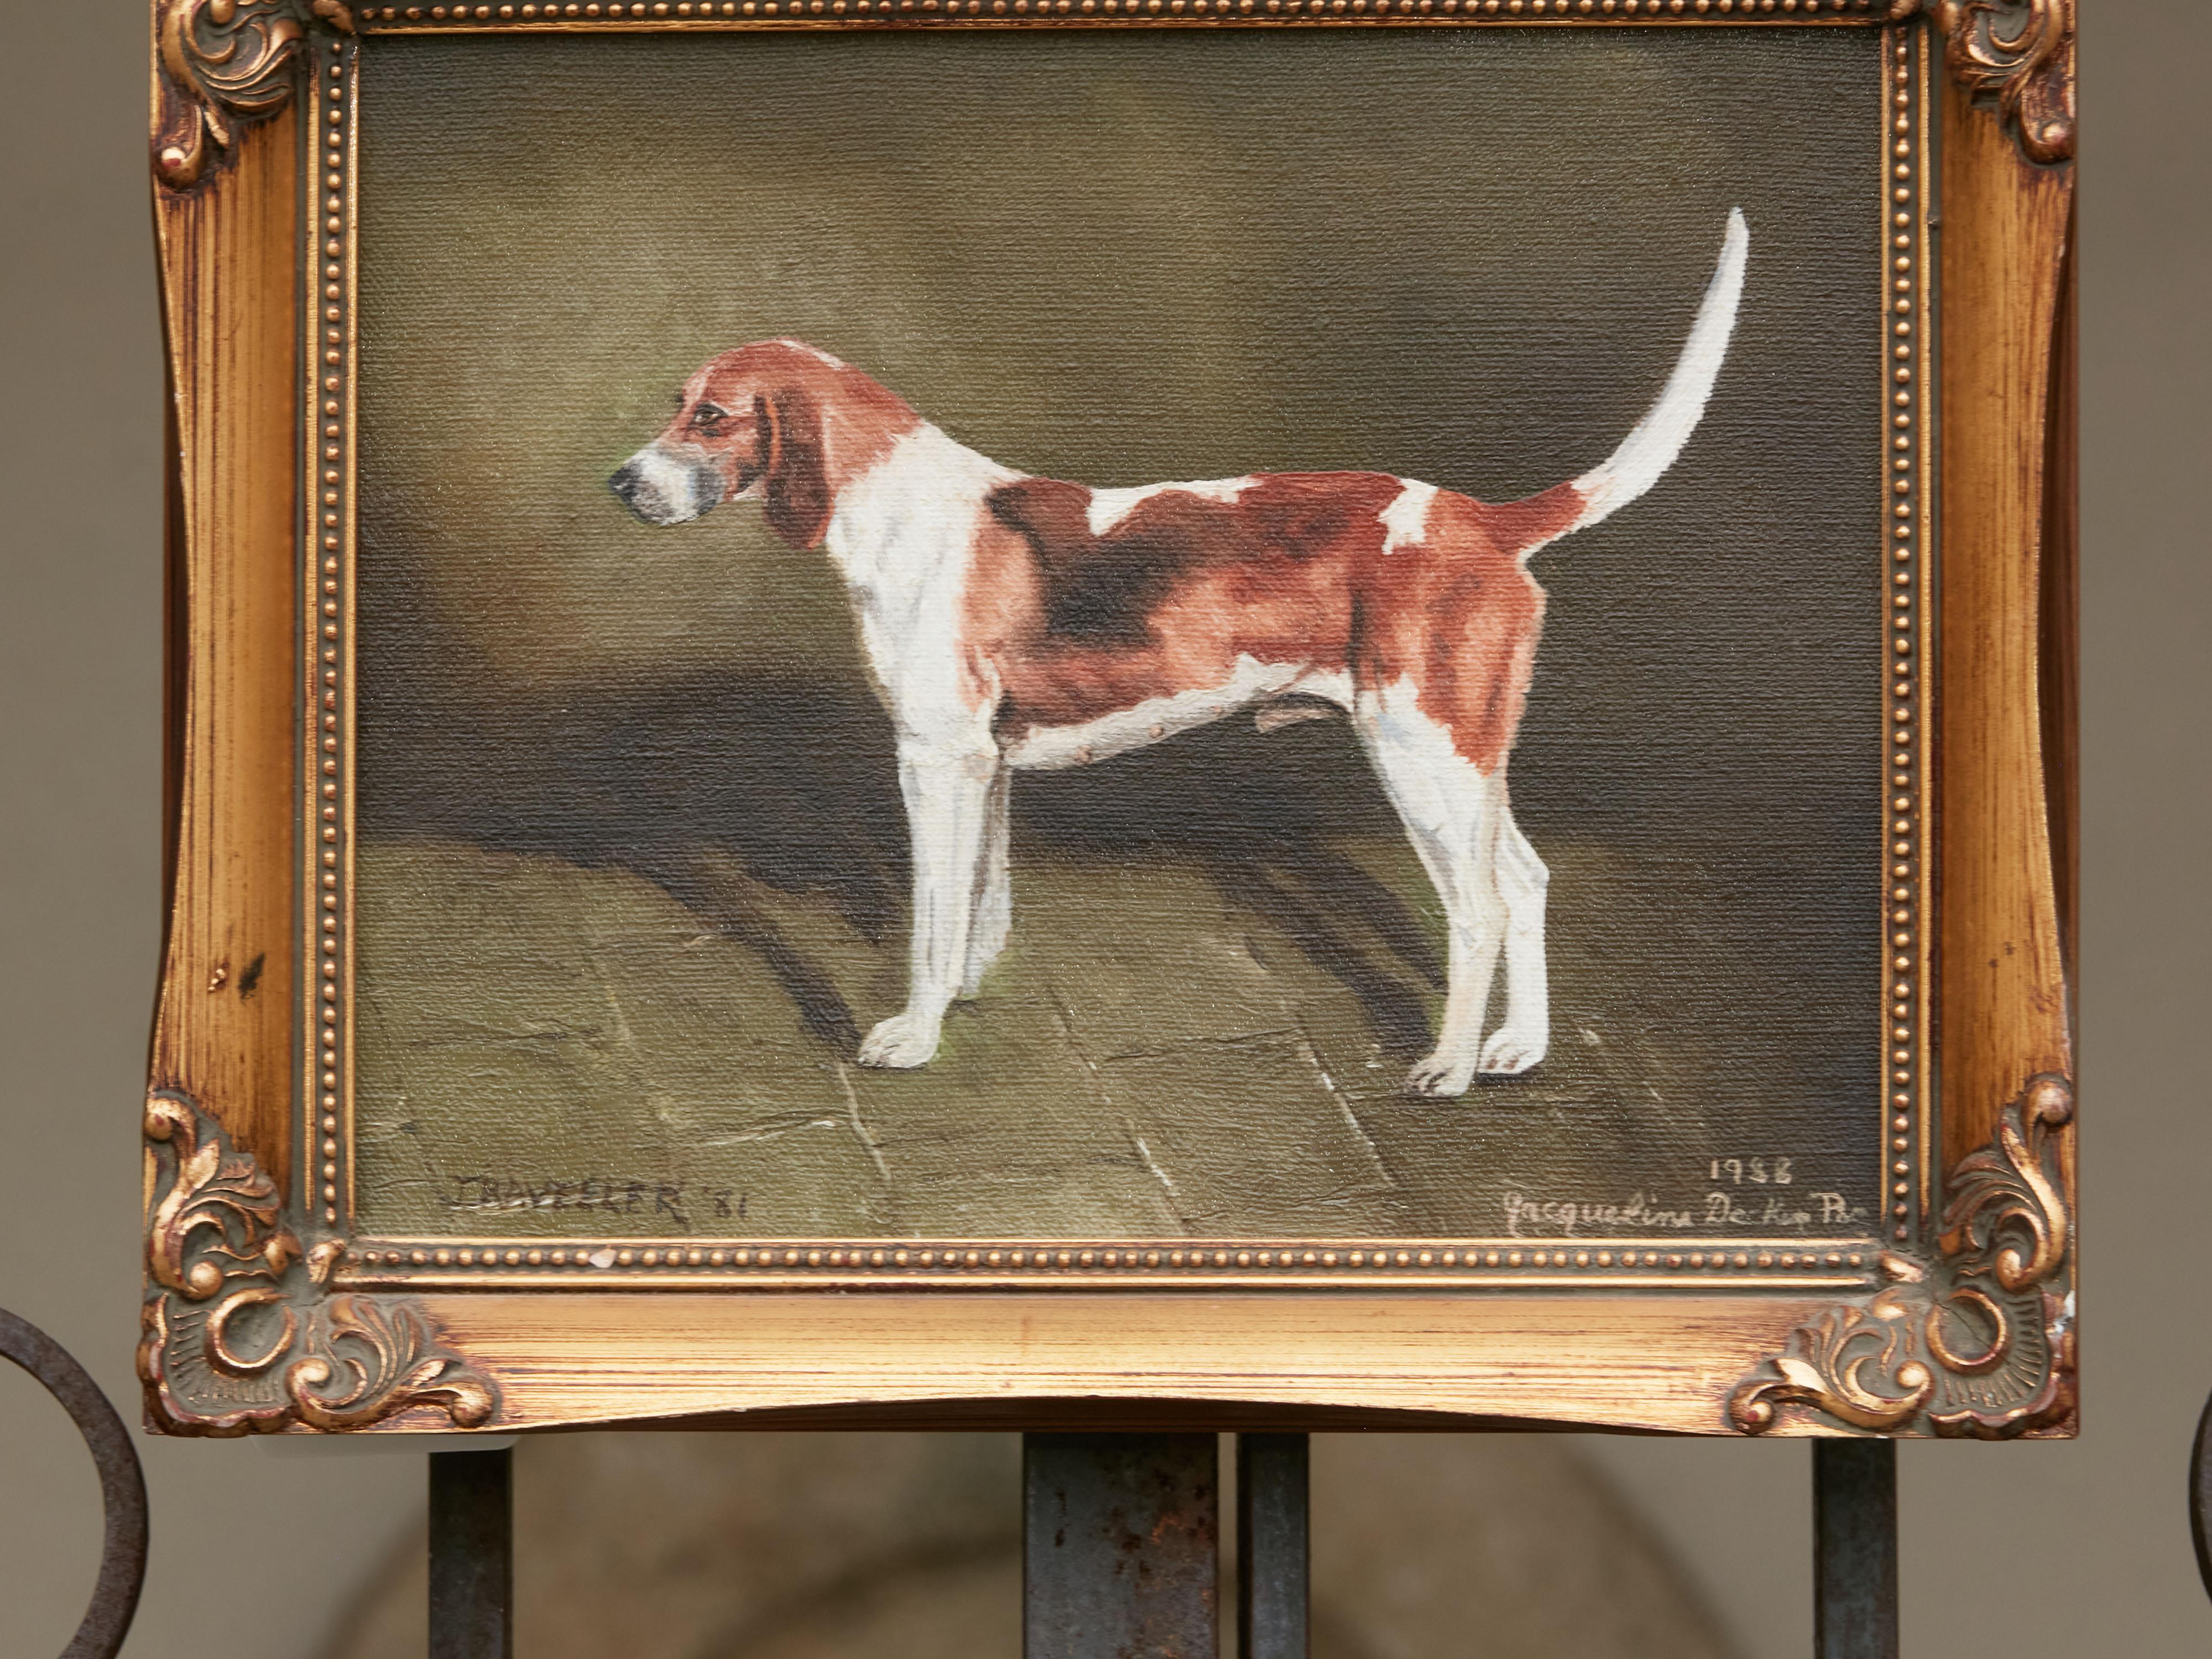 Oil on Canvas Dog Painting Depicting a Belvoir Hound, Signed Jacqueline Decker 6